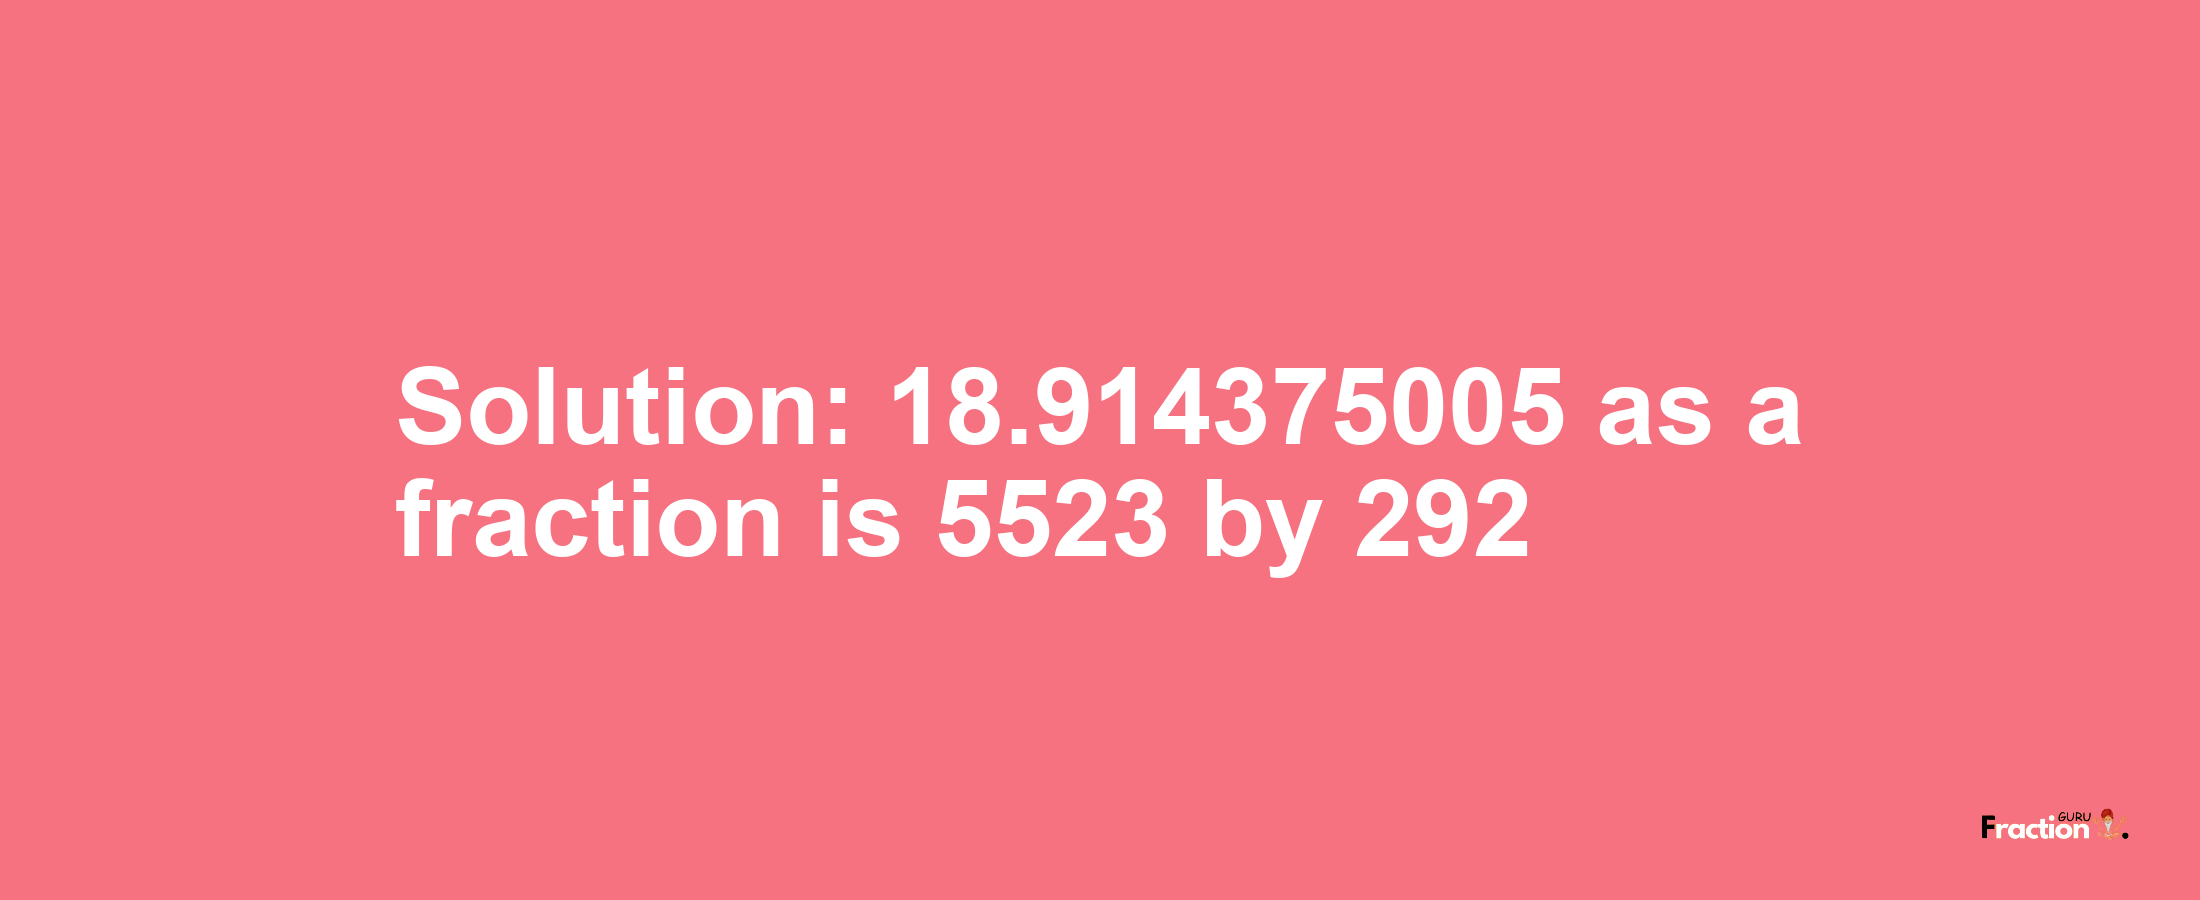 Solution:18.914375005 as a fraction is 5523/292